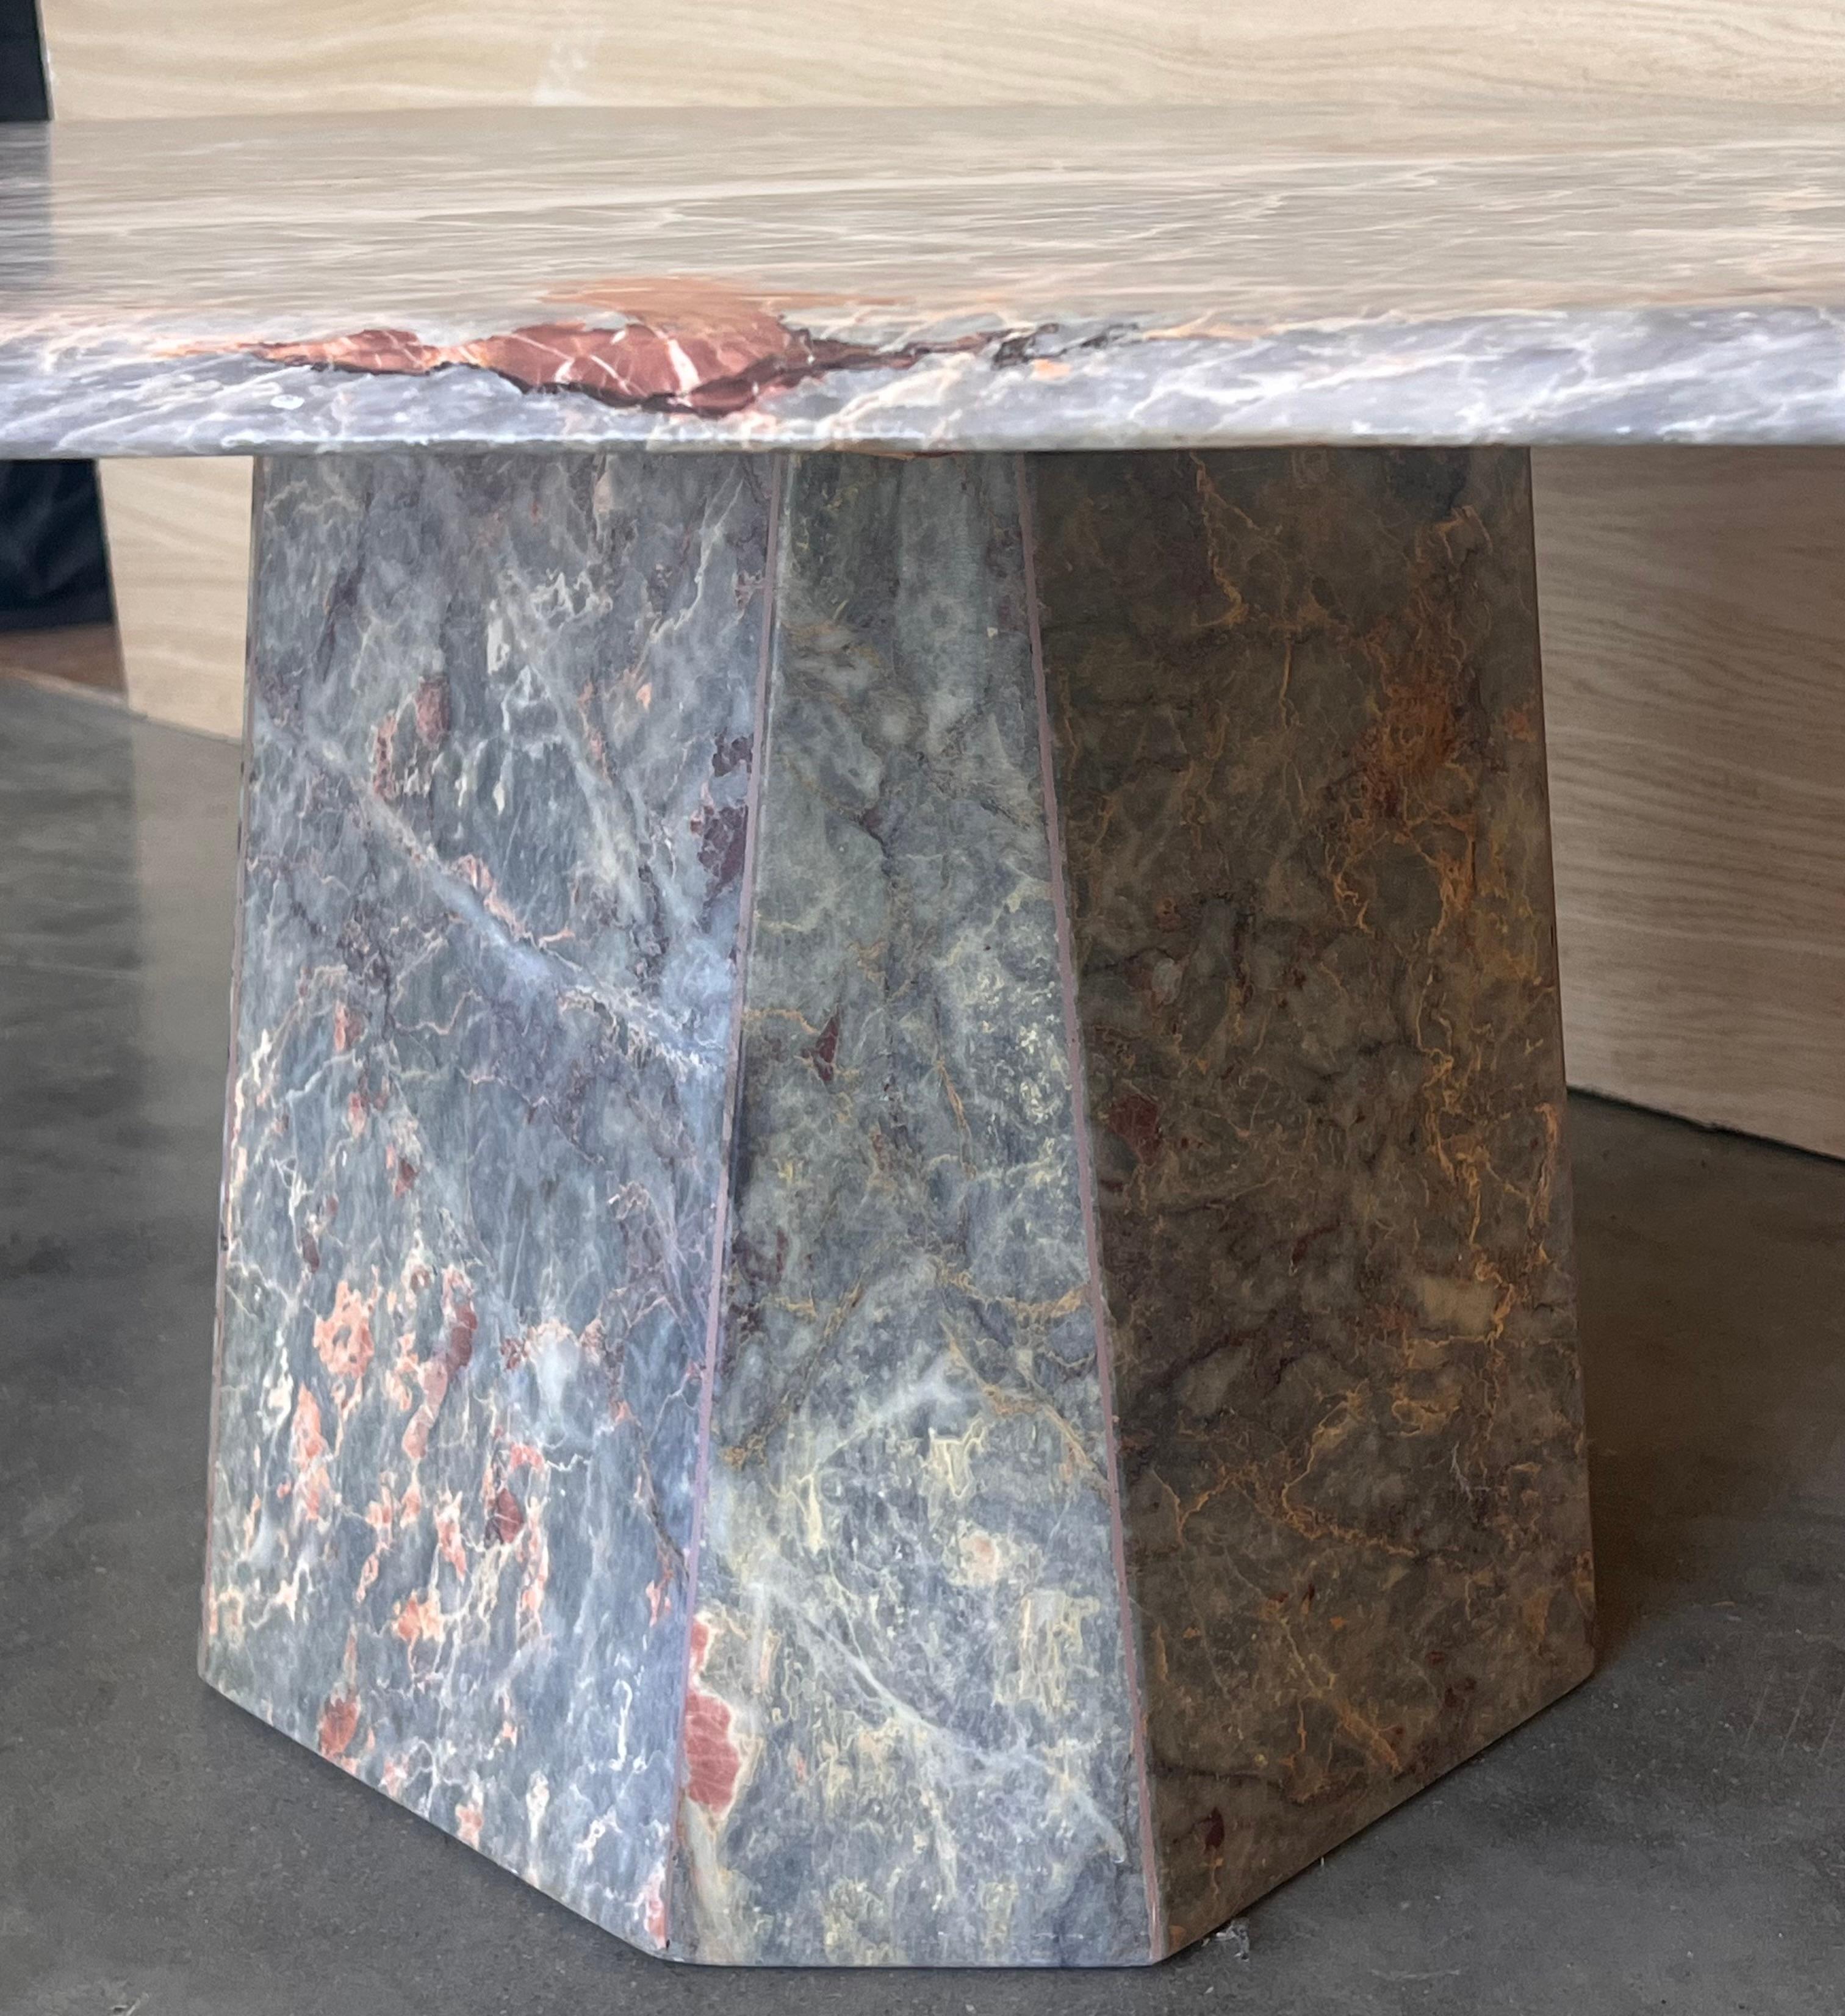 1970s Substantial White, Grey, Black, Pink Marble Coffee Table, sculptural Base For Sale 3